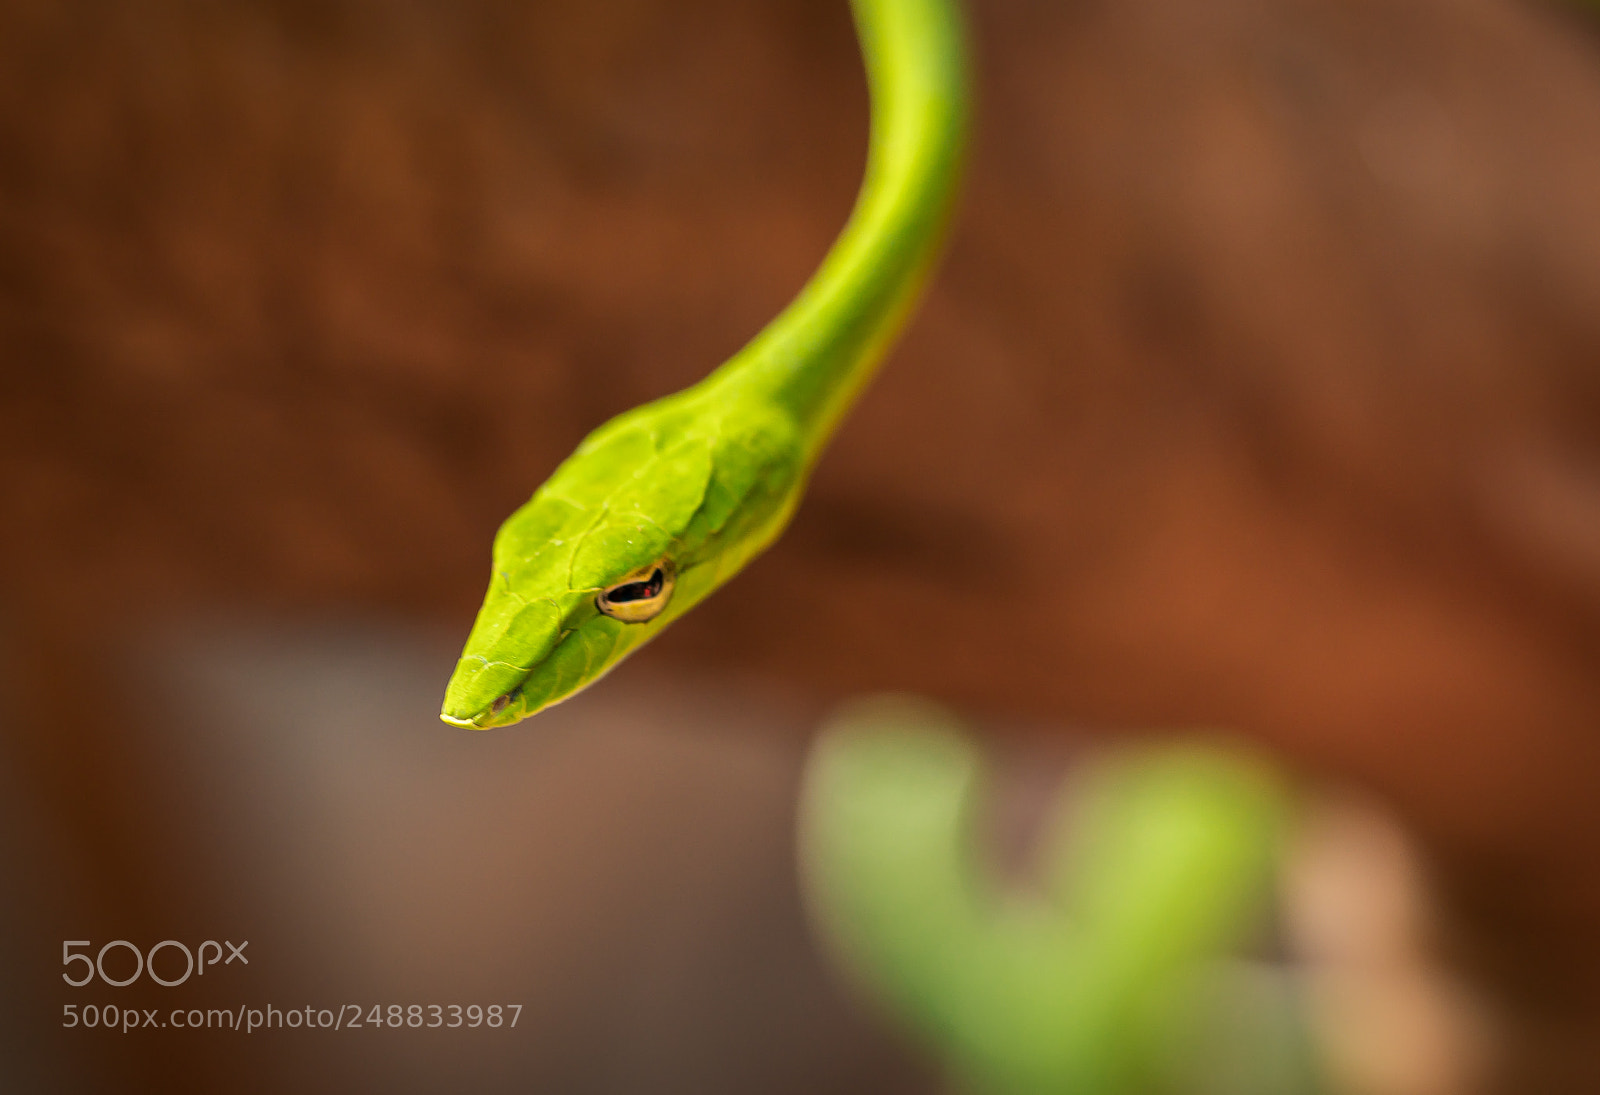 Sony a6500 sample photo. The green snake photography